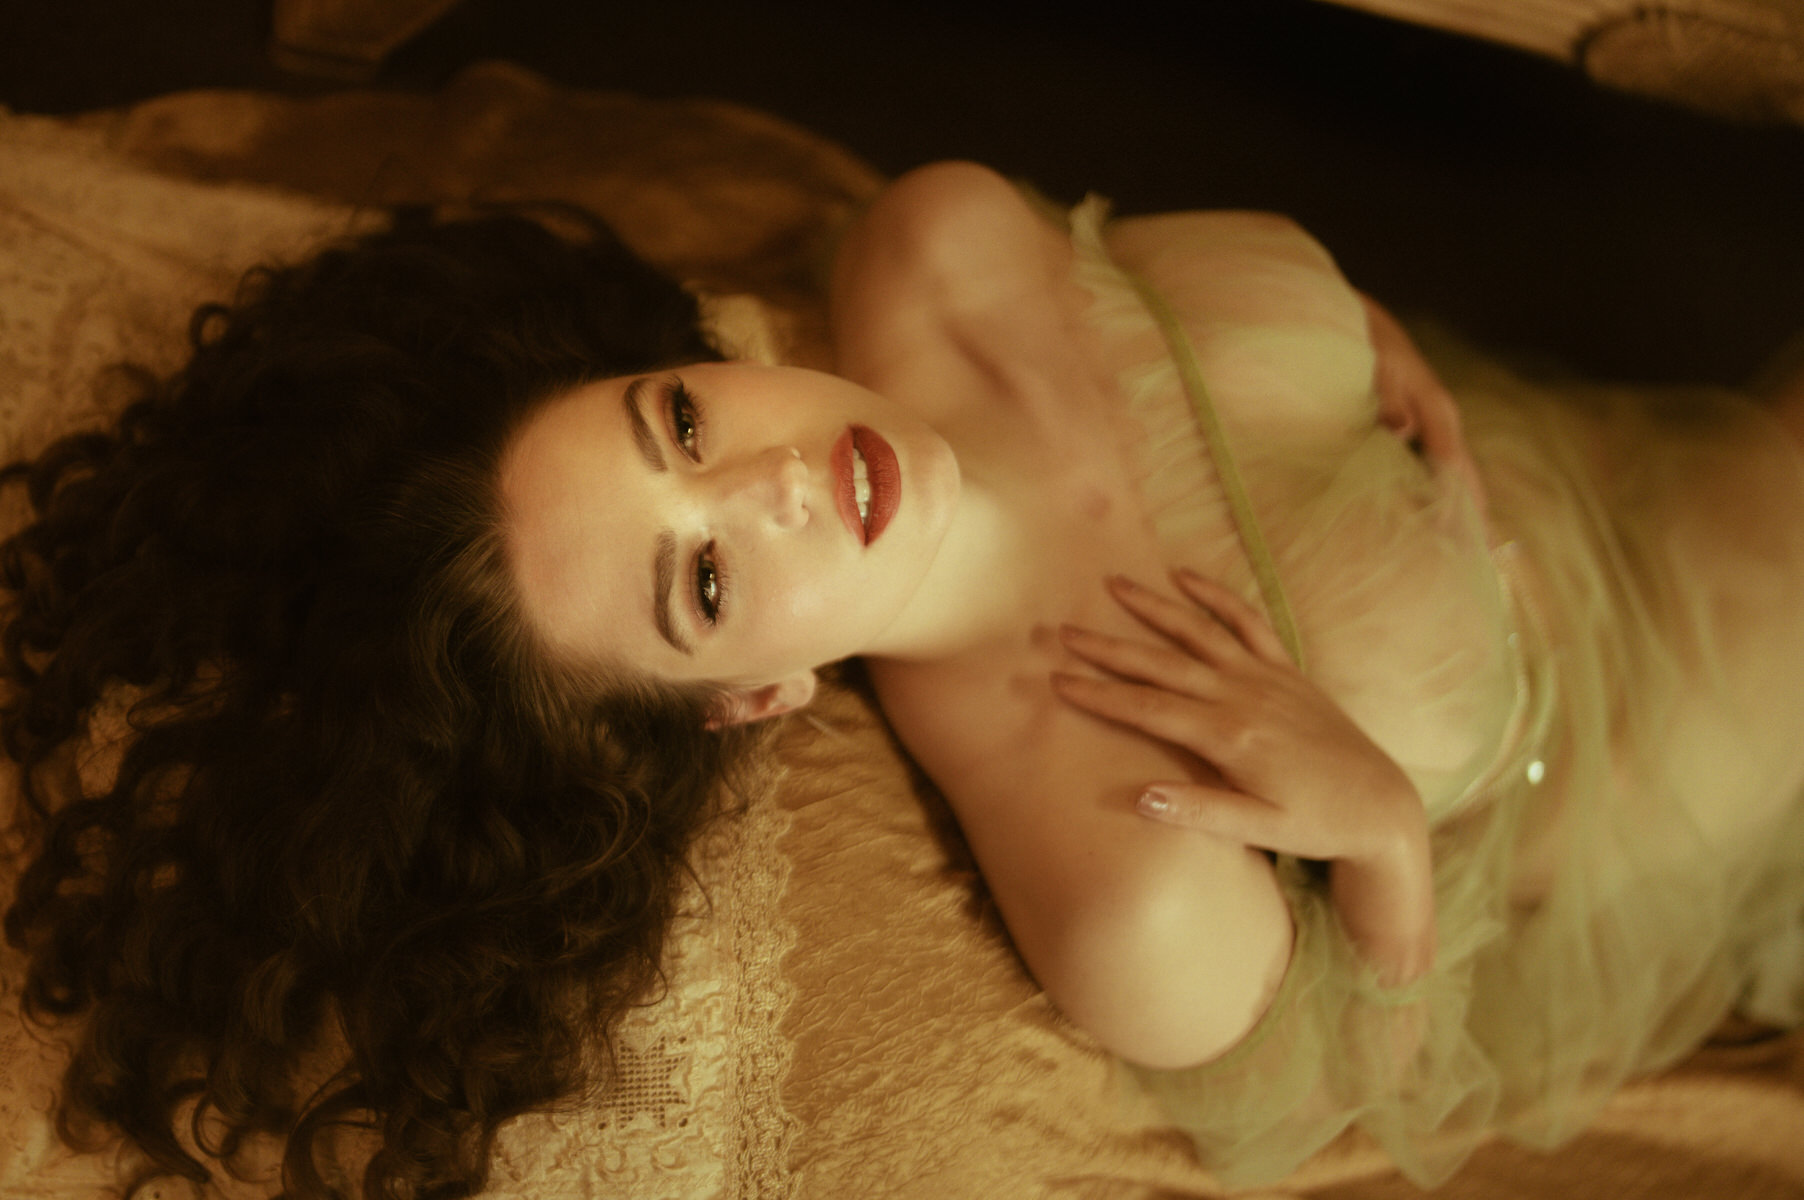 A pre-Raphaelite-inspired boudoir photo of a woman in a green dress laying on a bed.